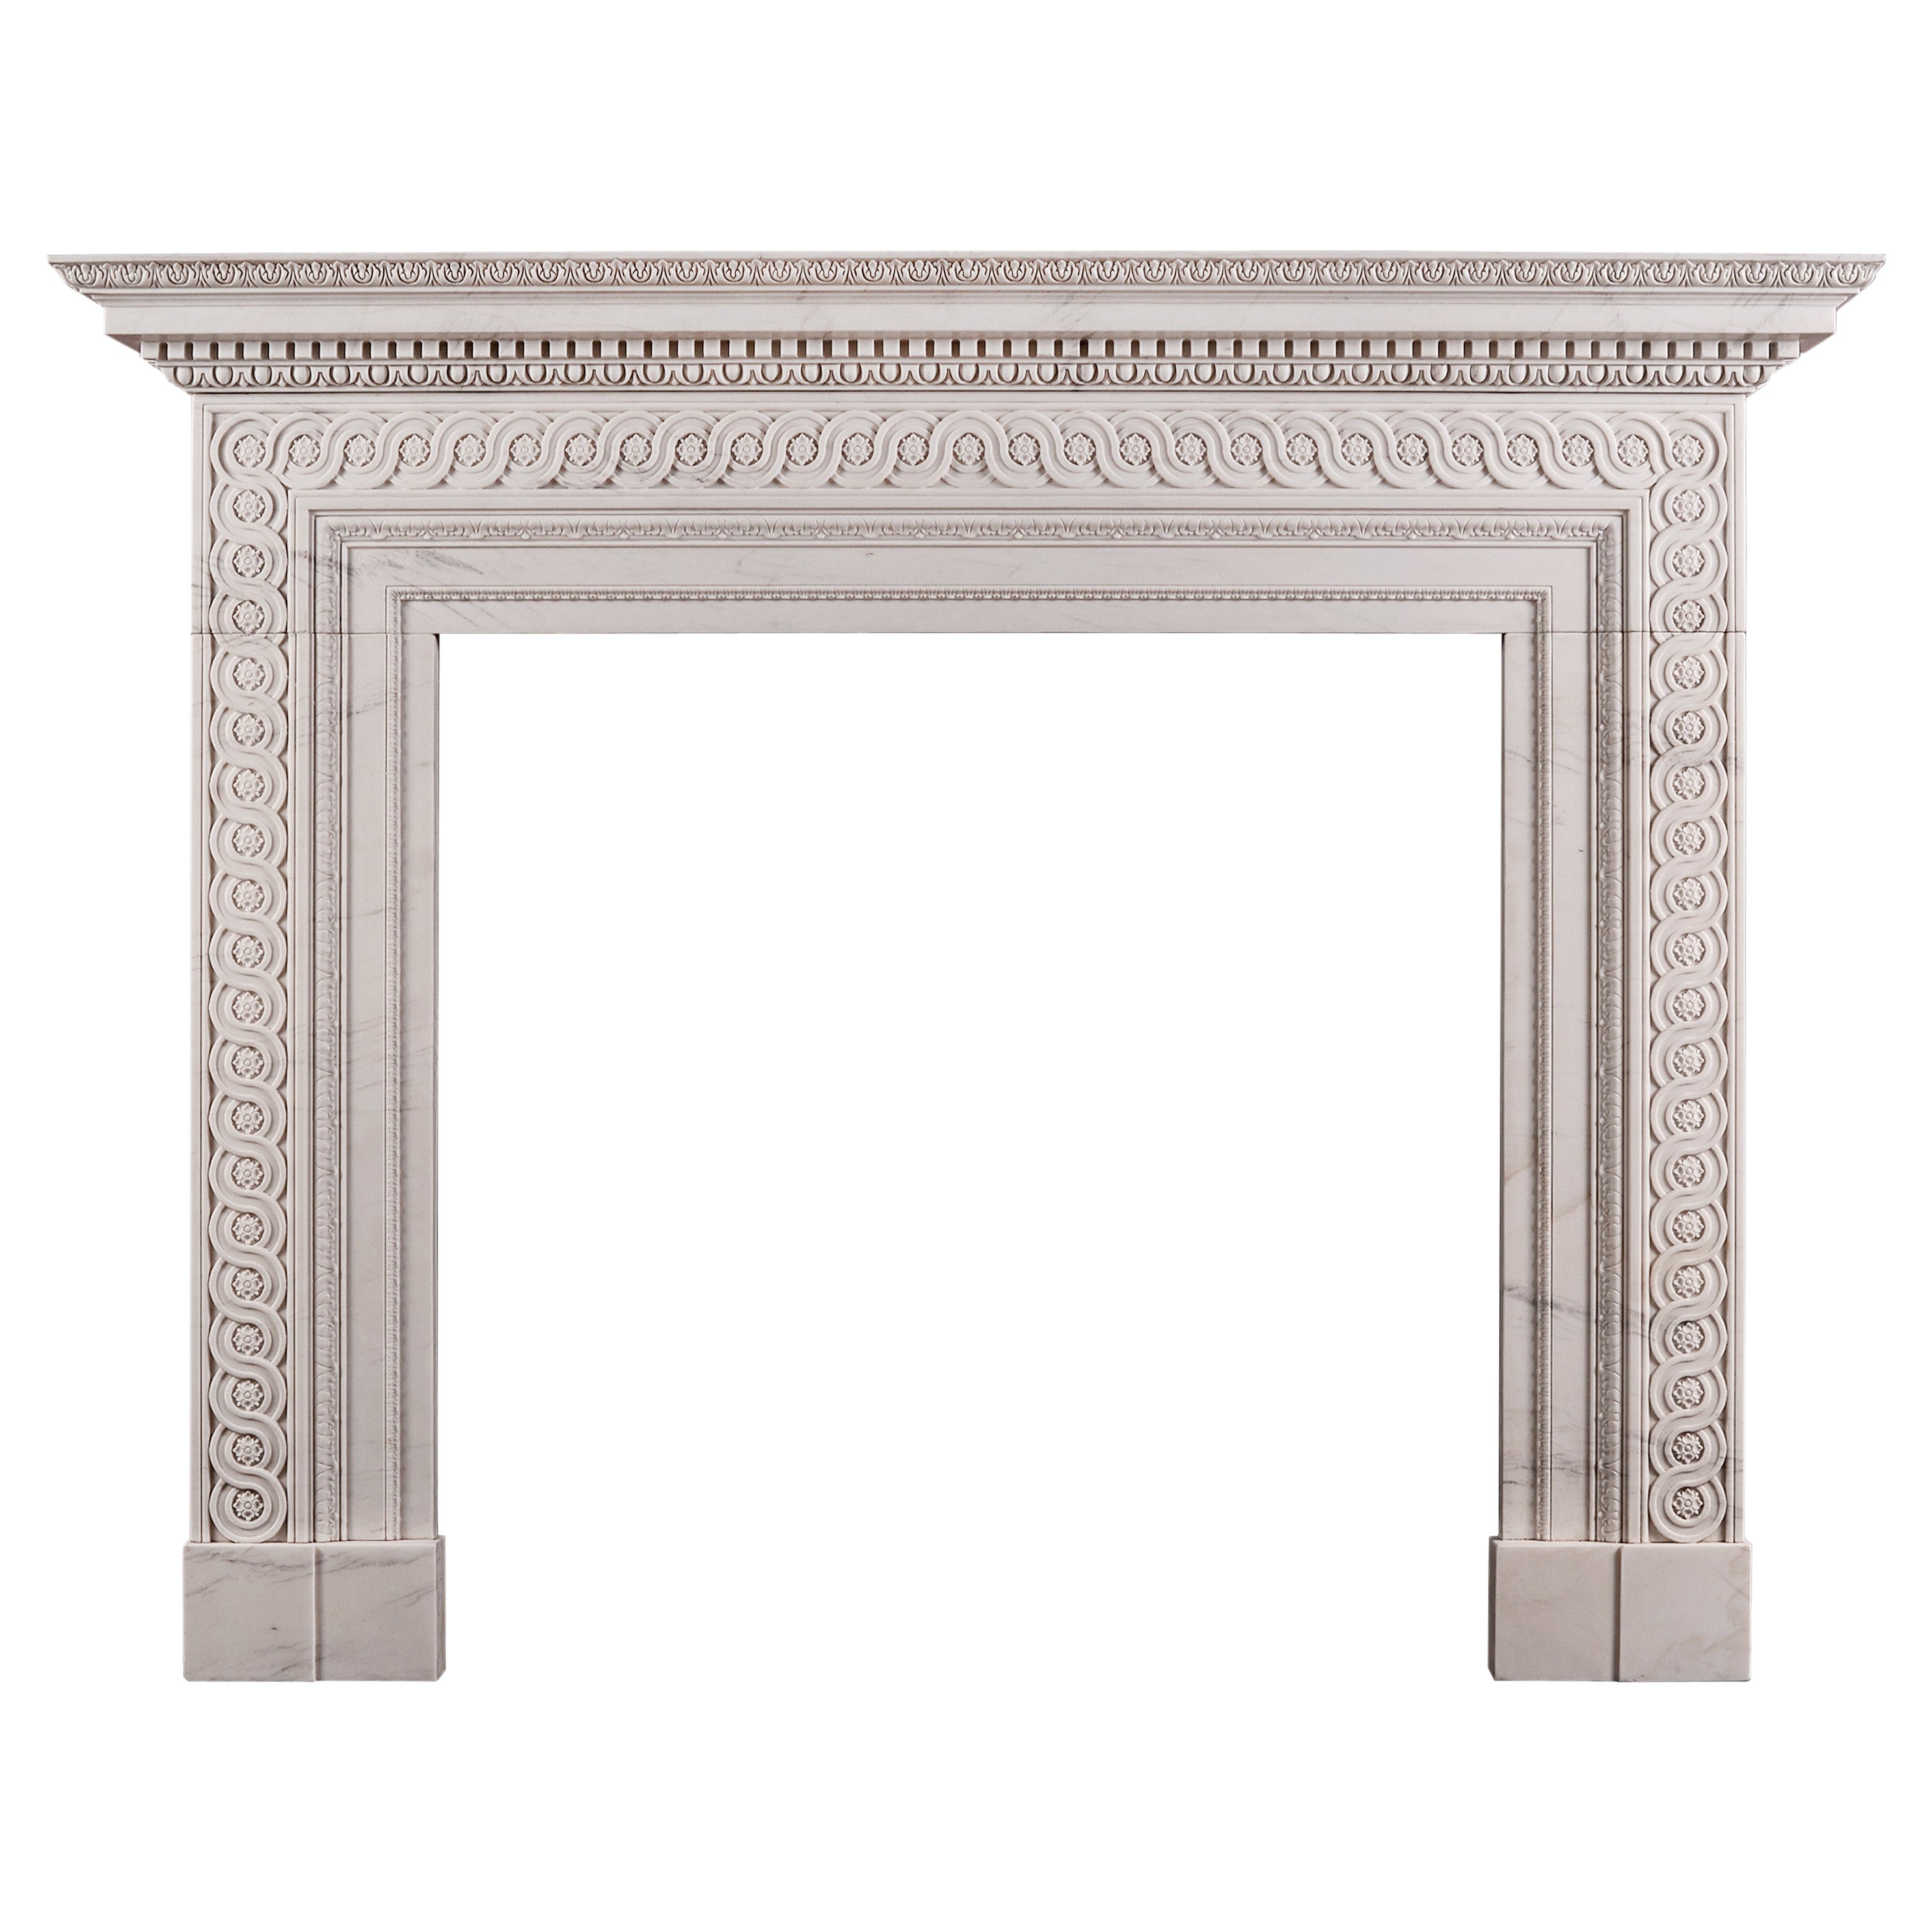 Late Georgian Style Fireplace Carved in White Marble